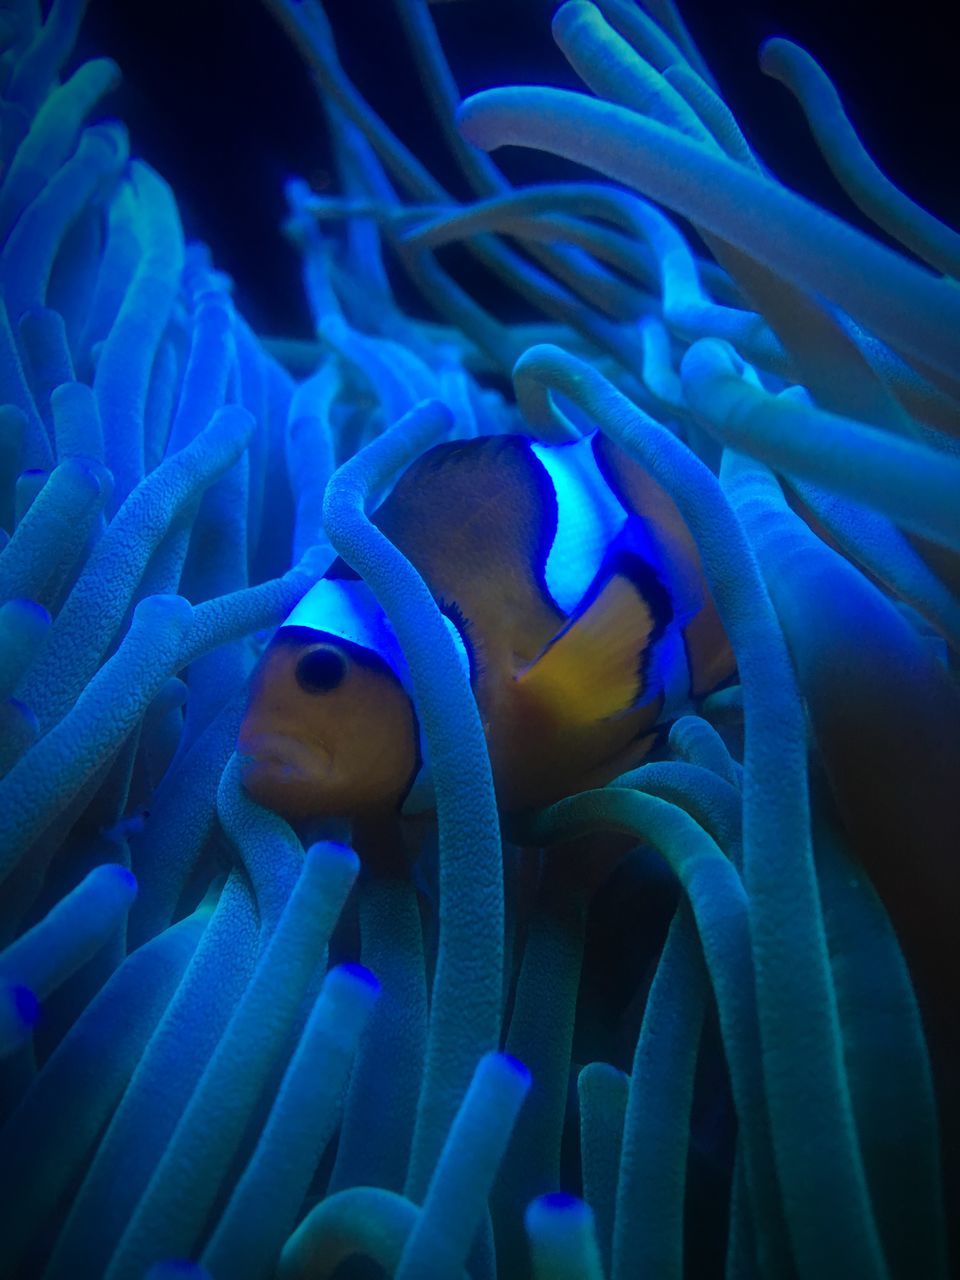 VIEW OF CORAL SWIMMING UNDERWATER